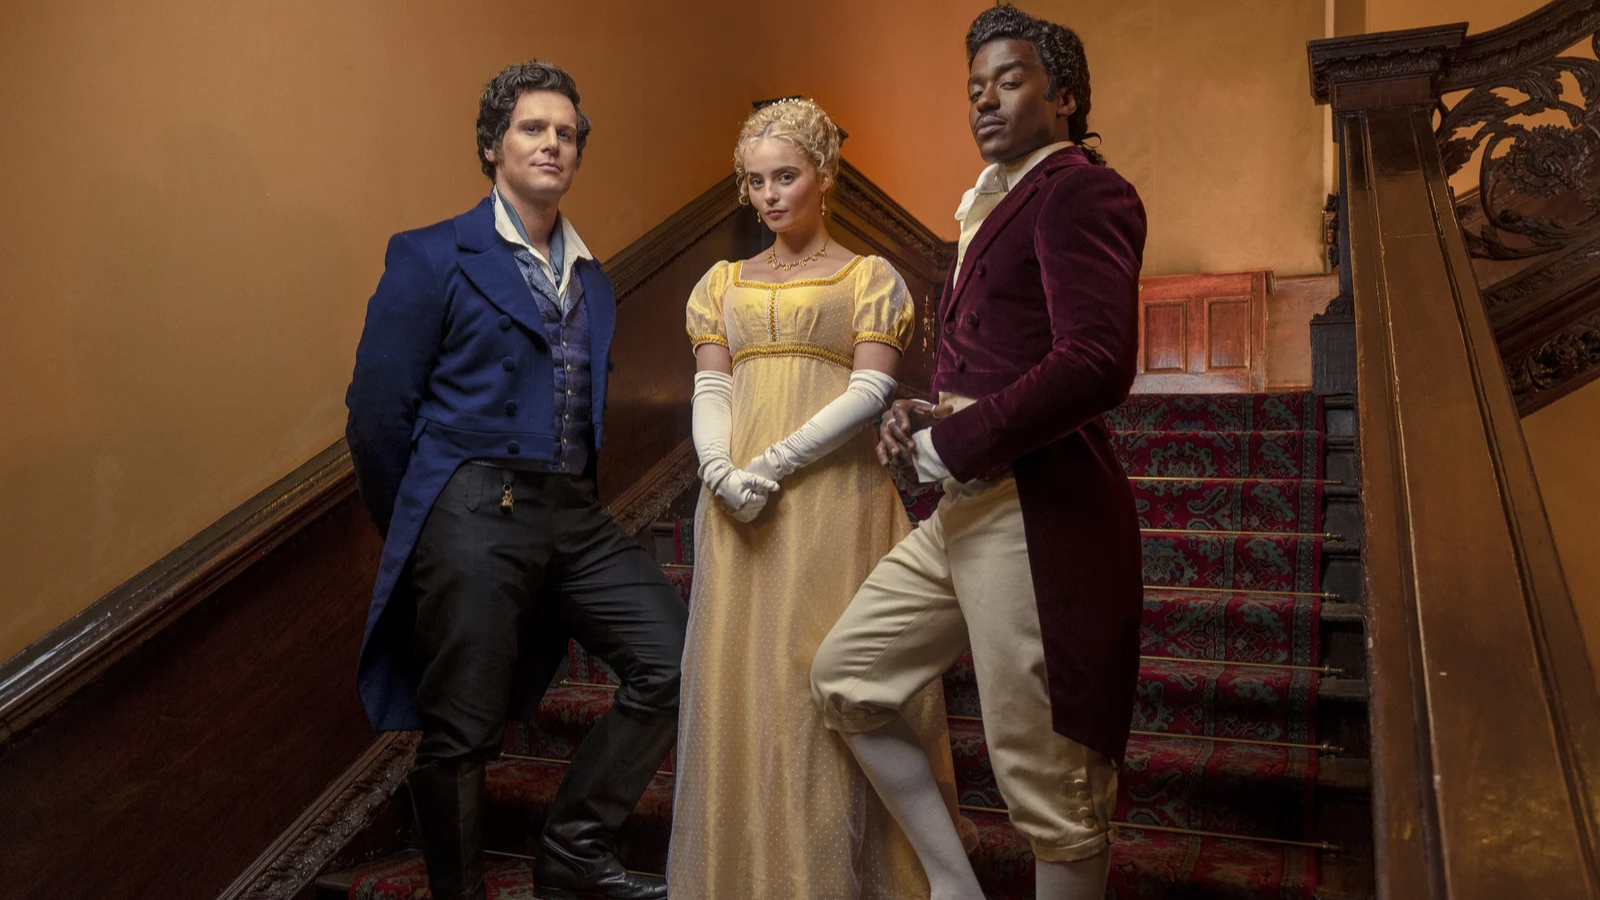 Actors Jonathan Groff, Millie Gibson, and Ncuti Gatwa wear regal attire and stand on a staircase in Doctor Who season 14